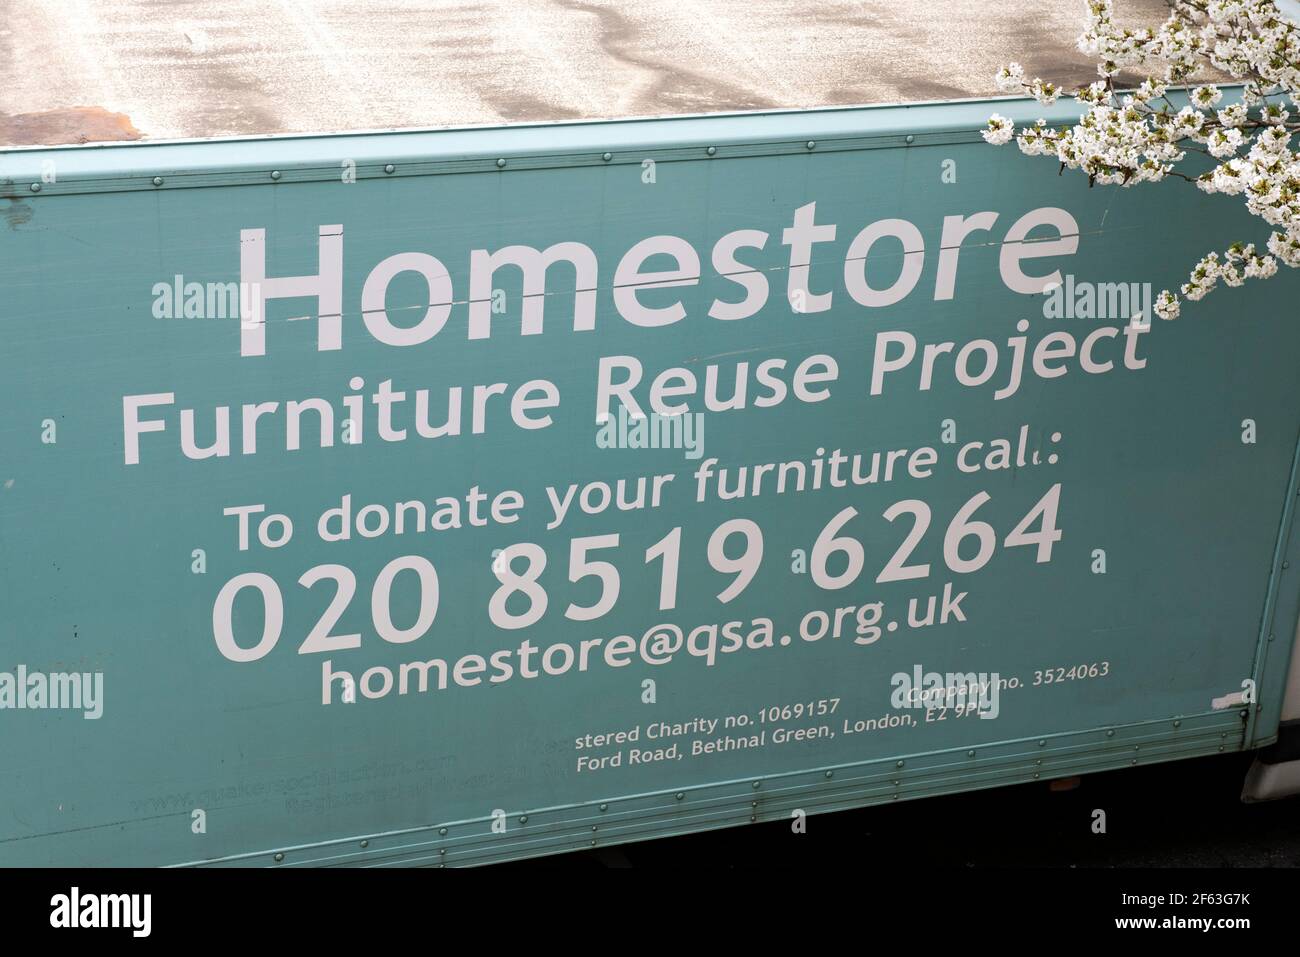 Homestore Furniture Reuse Project, side of collection delivery van. Formally Quaker Social Action Stock Photo